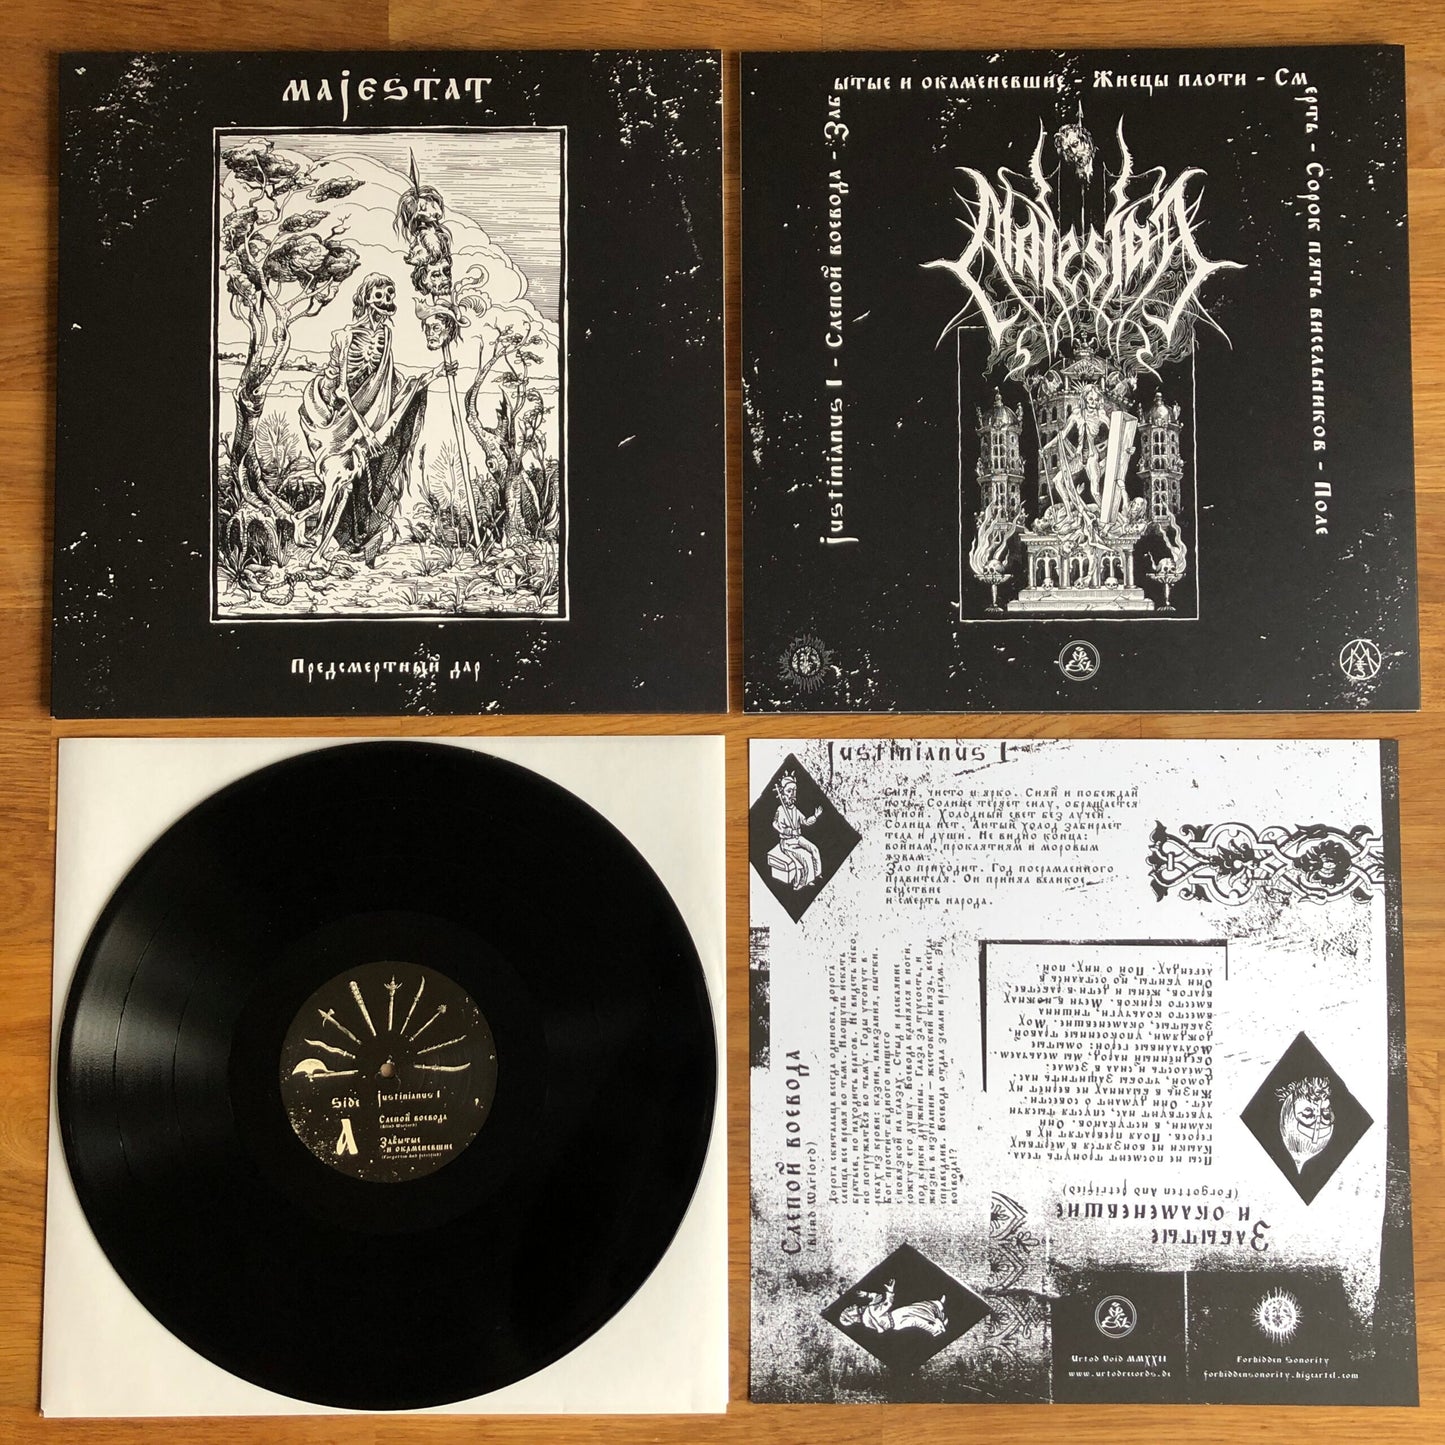 Majestat (Rus) (Предсмертный дар (A Gift Before Death)" - 12" LP *New in Stock*